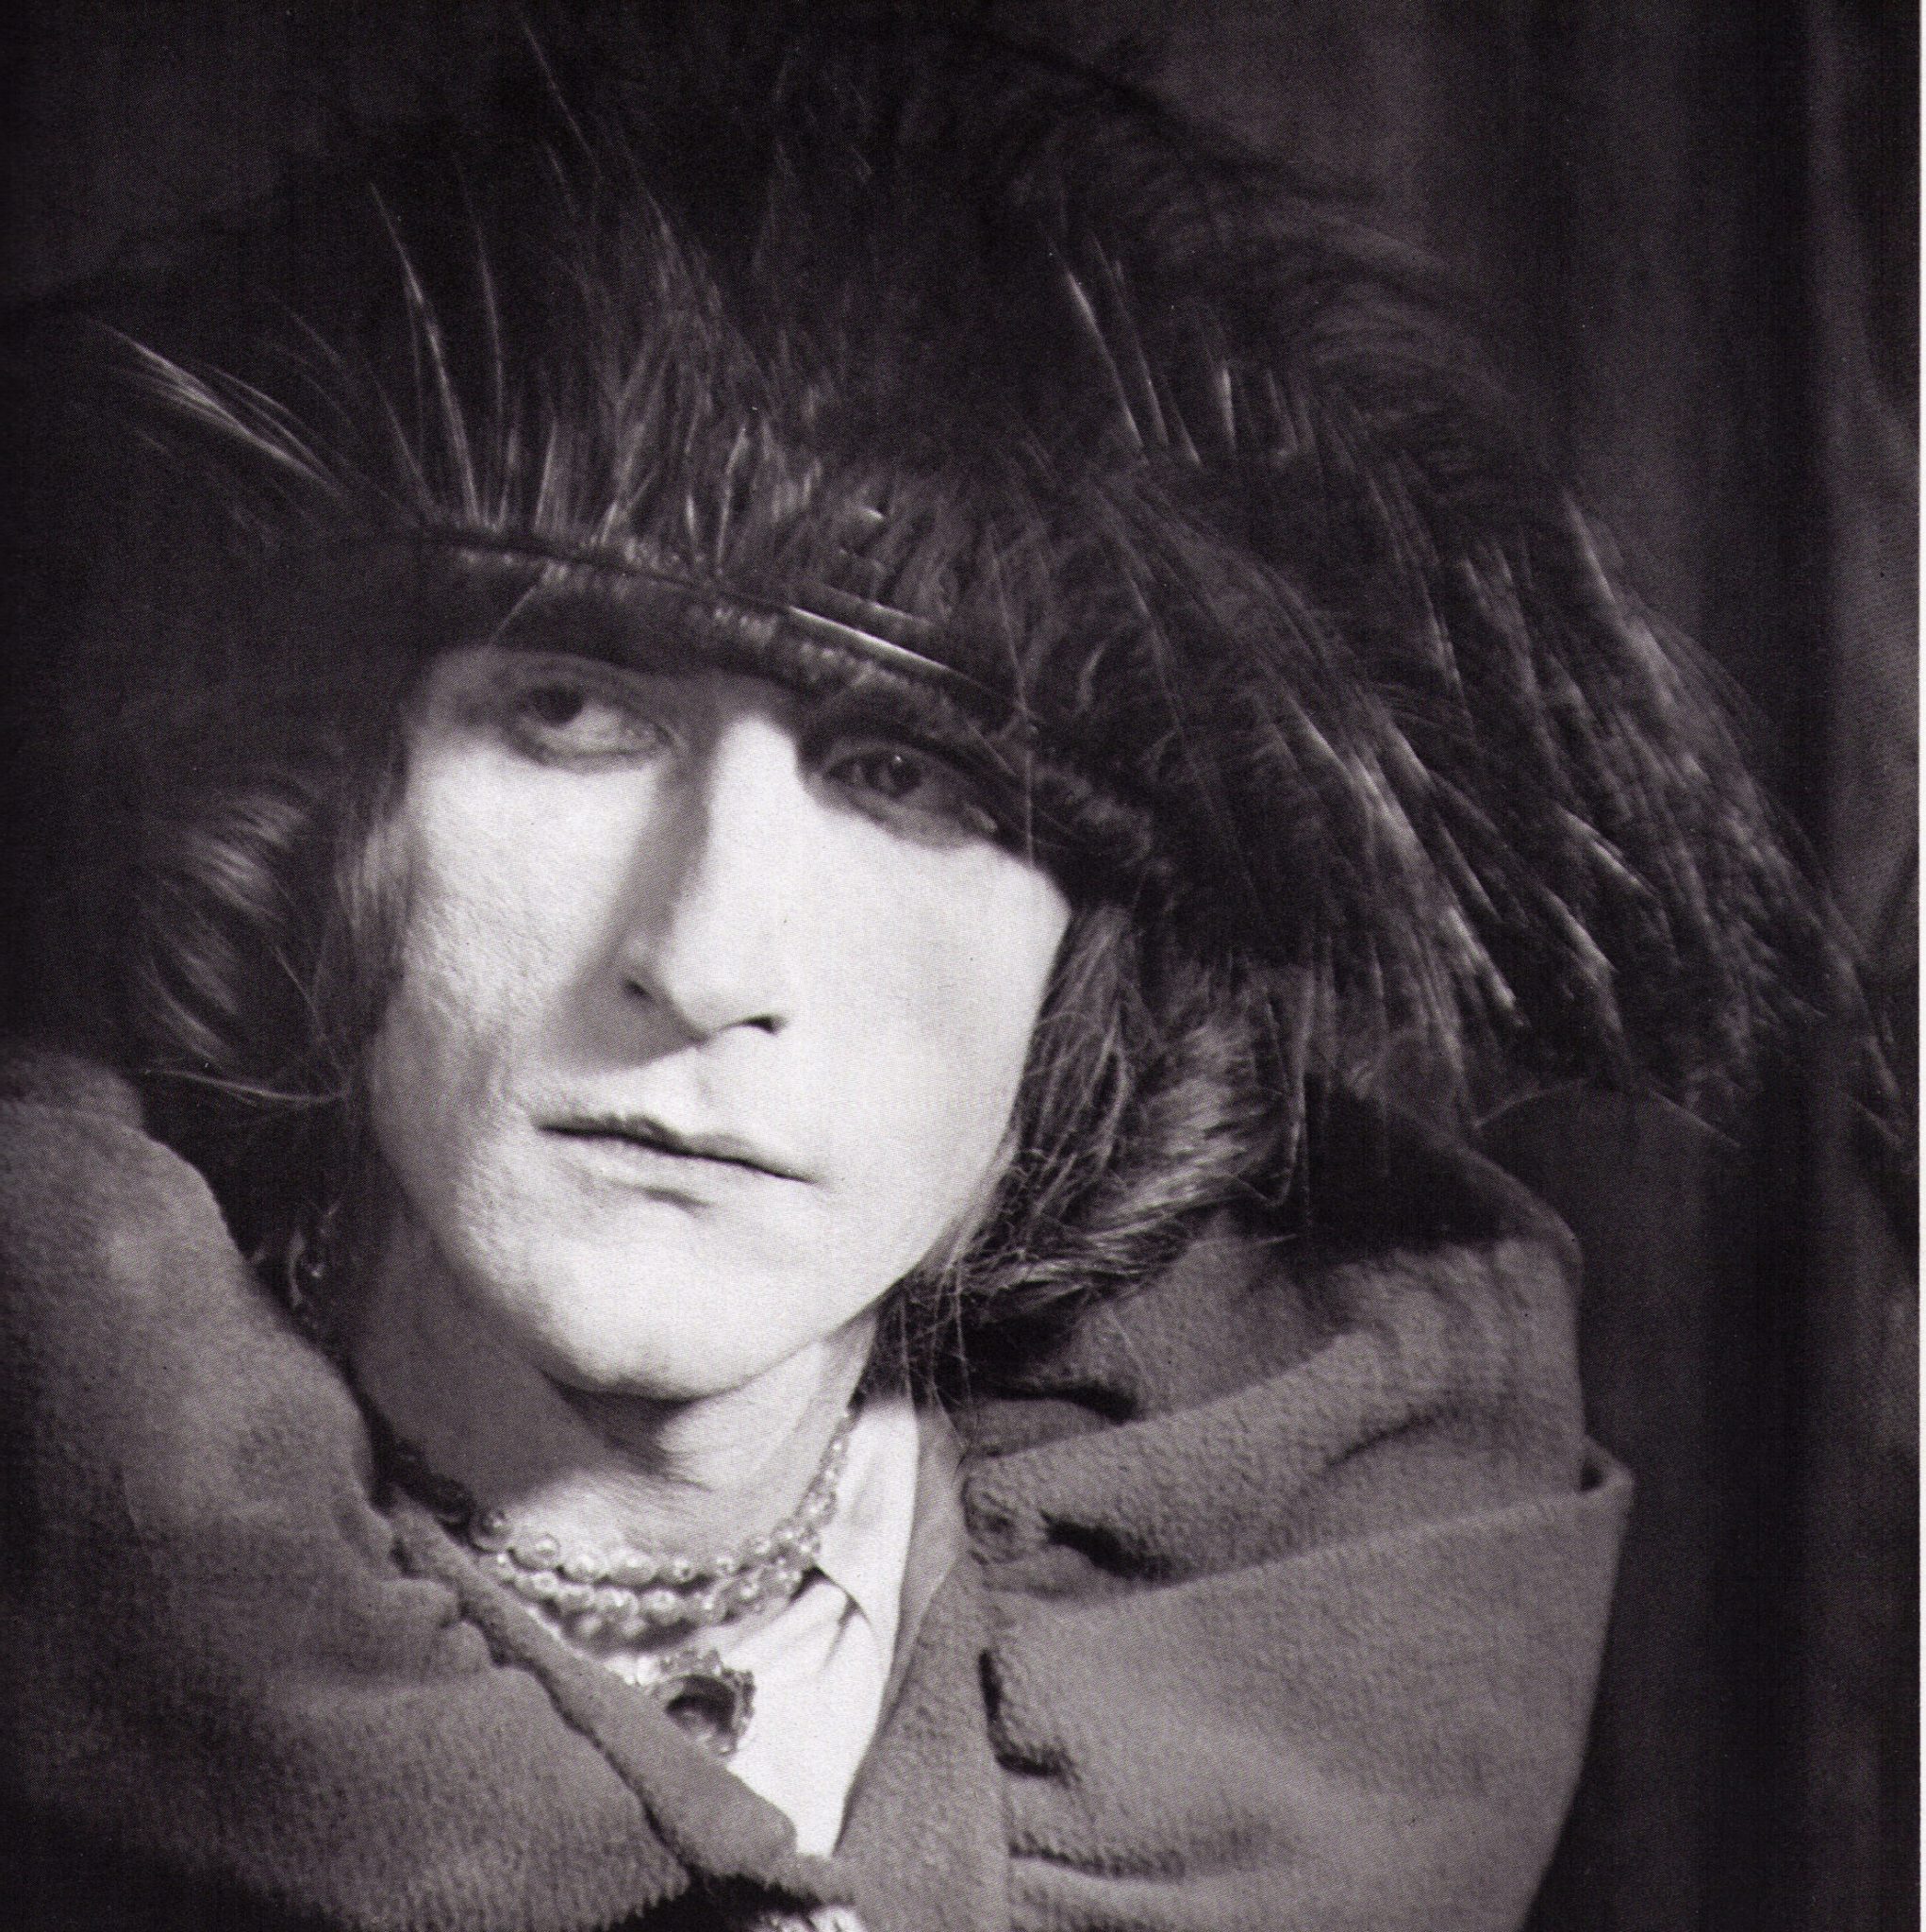 Marcel Duchamp, the Most Iconic and Famous Dada Artist in the World